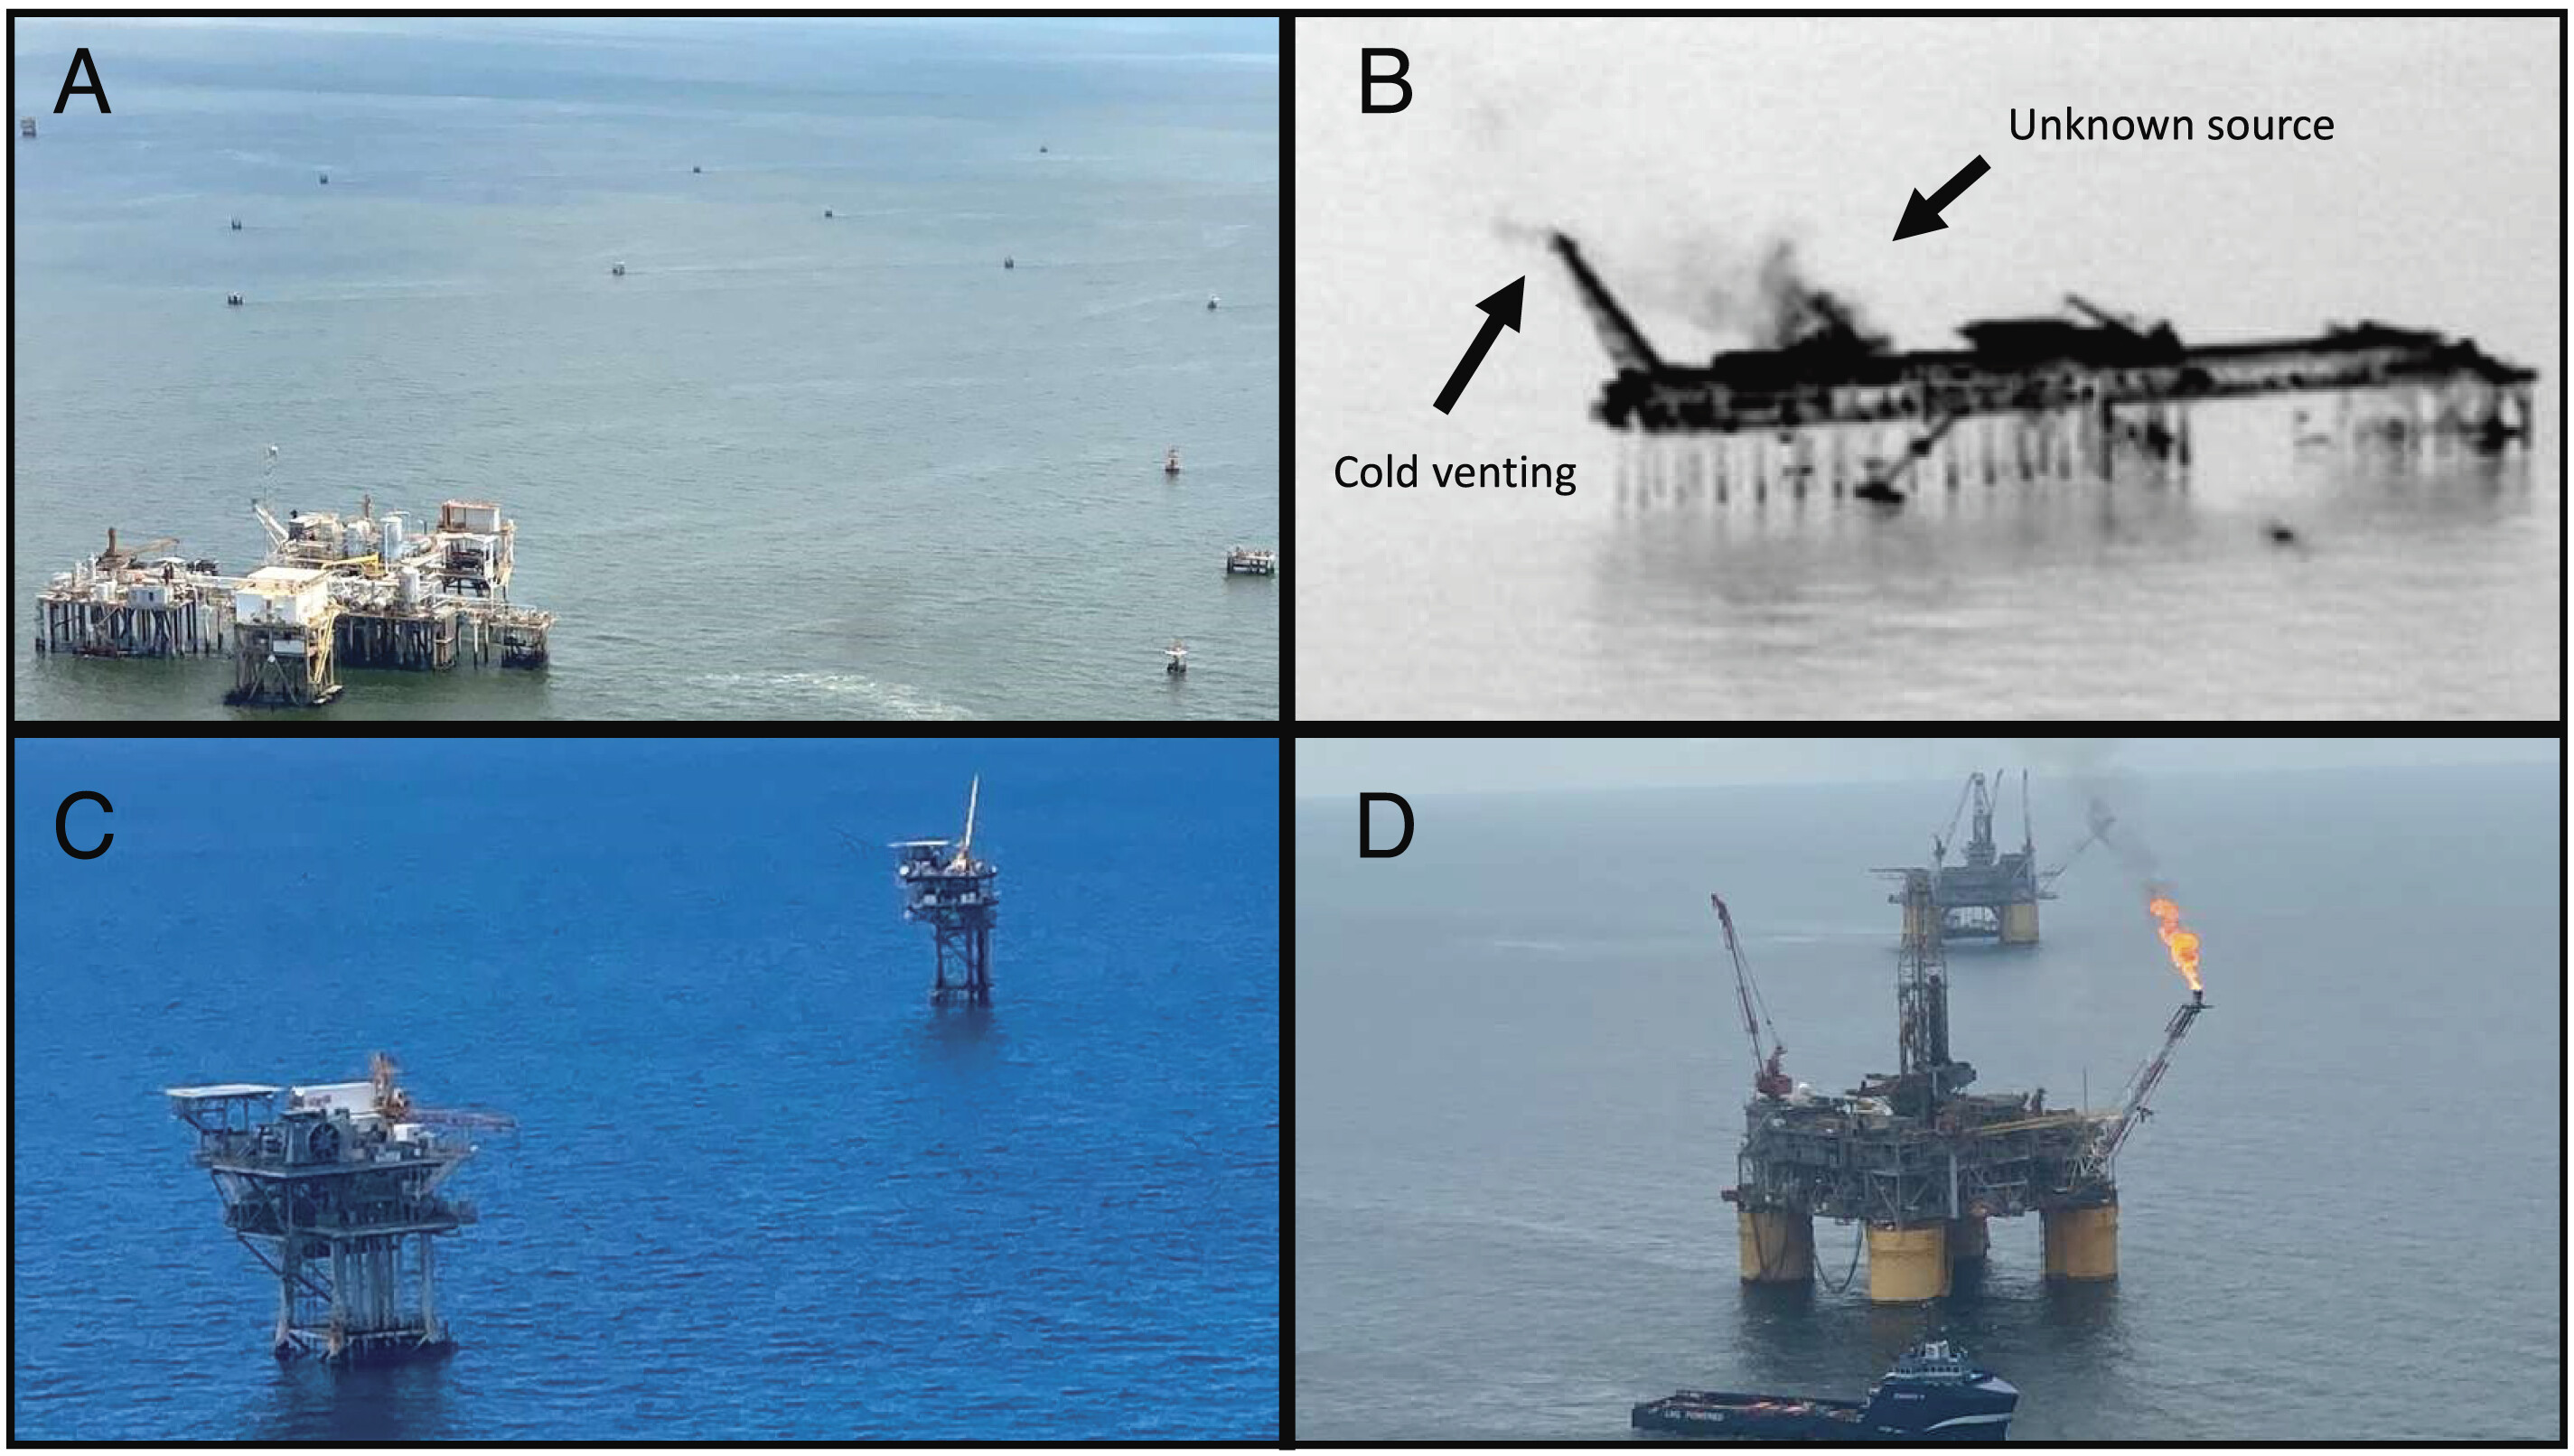 Images taken of offshore oil and gas production facilities. (A) Small satellite facilities around a central hub facility. (B) Forward-looking infrared (FLIR) camera imagery of hydrocarbon emissions from a central hub facility. Two sources are identified: cold venting and an unknown piece of equipment. (C) Other shallow water facilities. (D) Deep water facilities with flaring. Graphic: Negron, et al., 2023 / PNAS